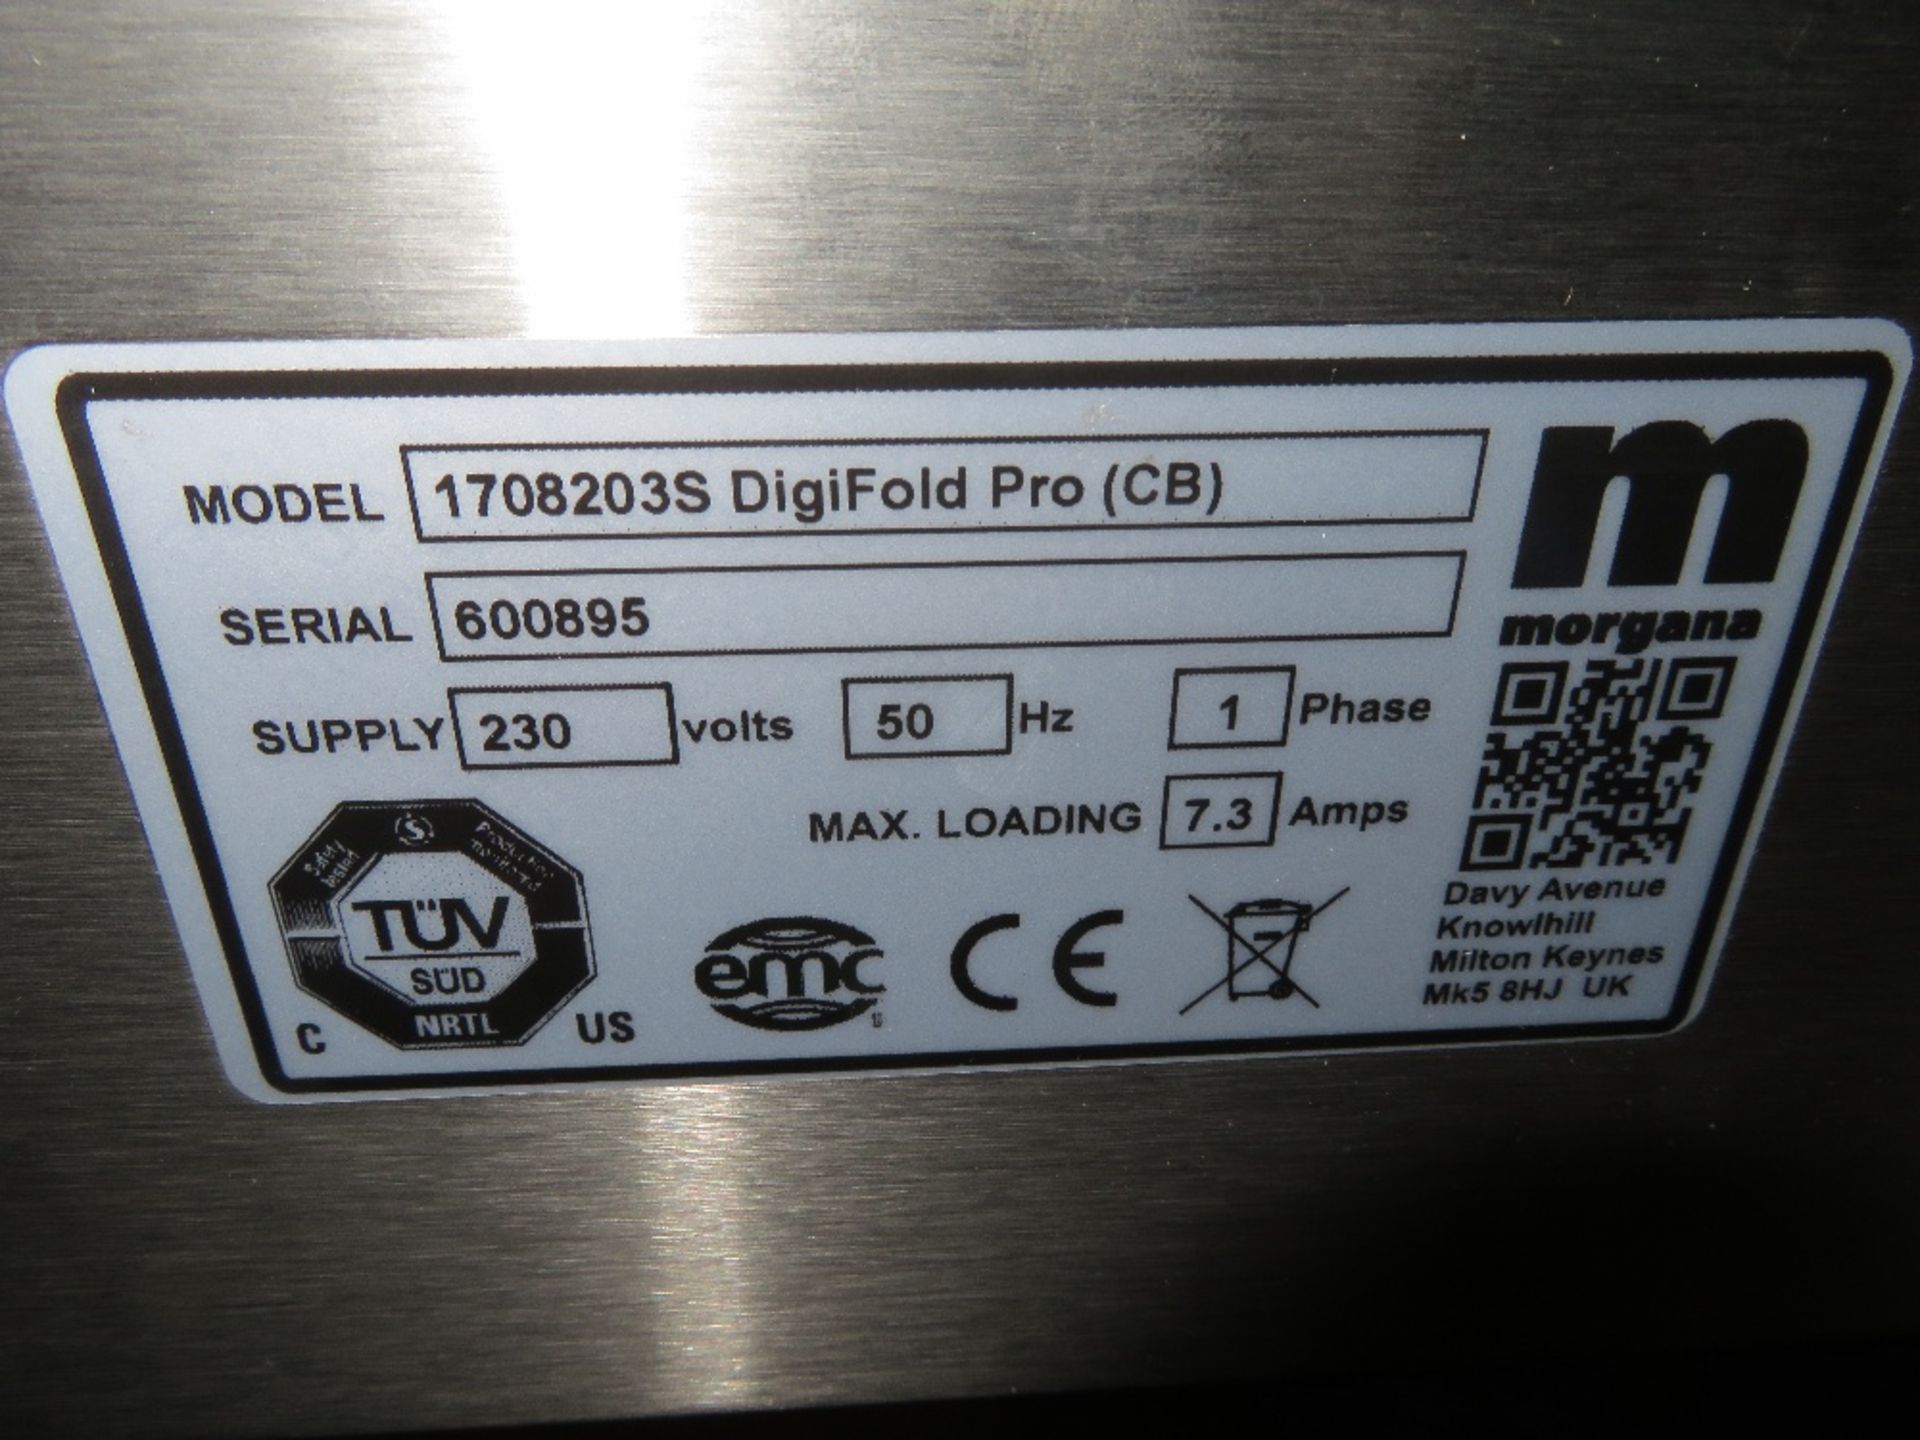 Morgana Model Digifold Pro 1708203S (CB) Creasing and Folding Machine, Serial No. 600895 - Image 3 of 6